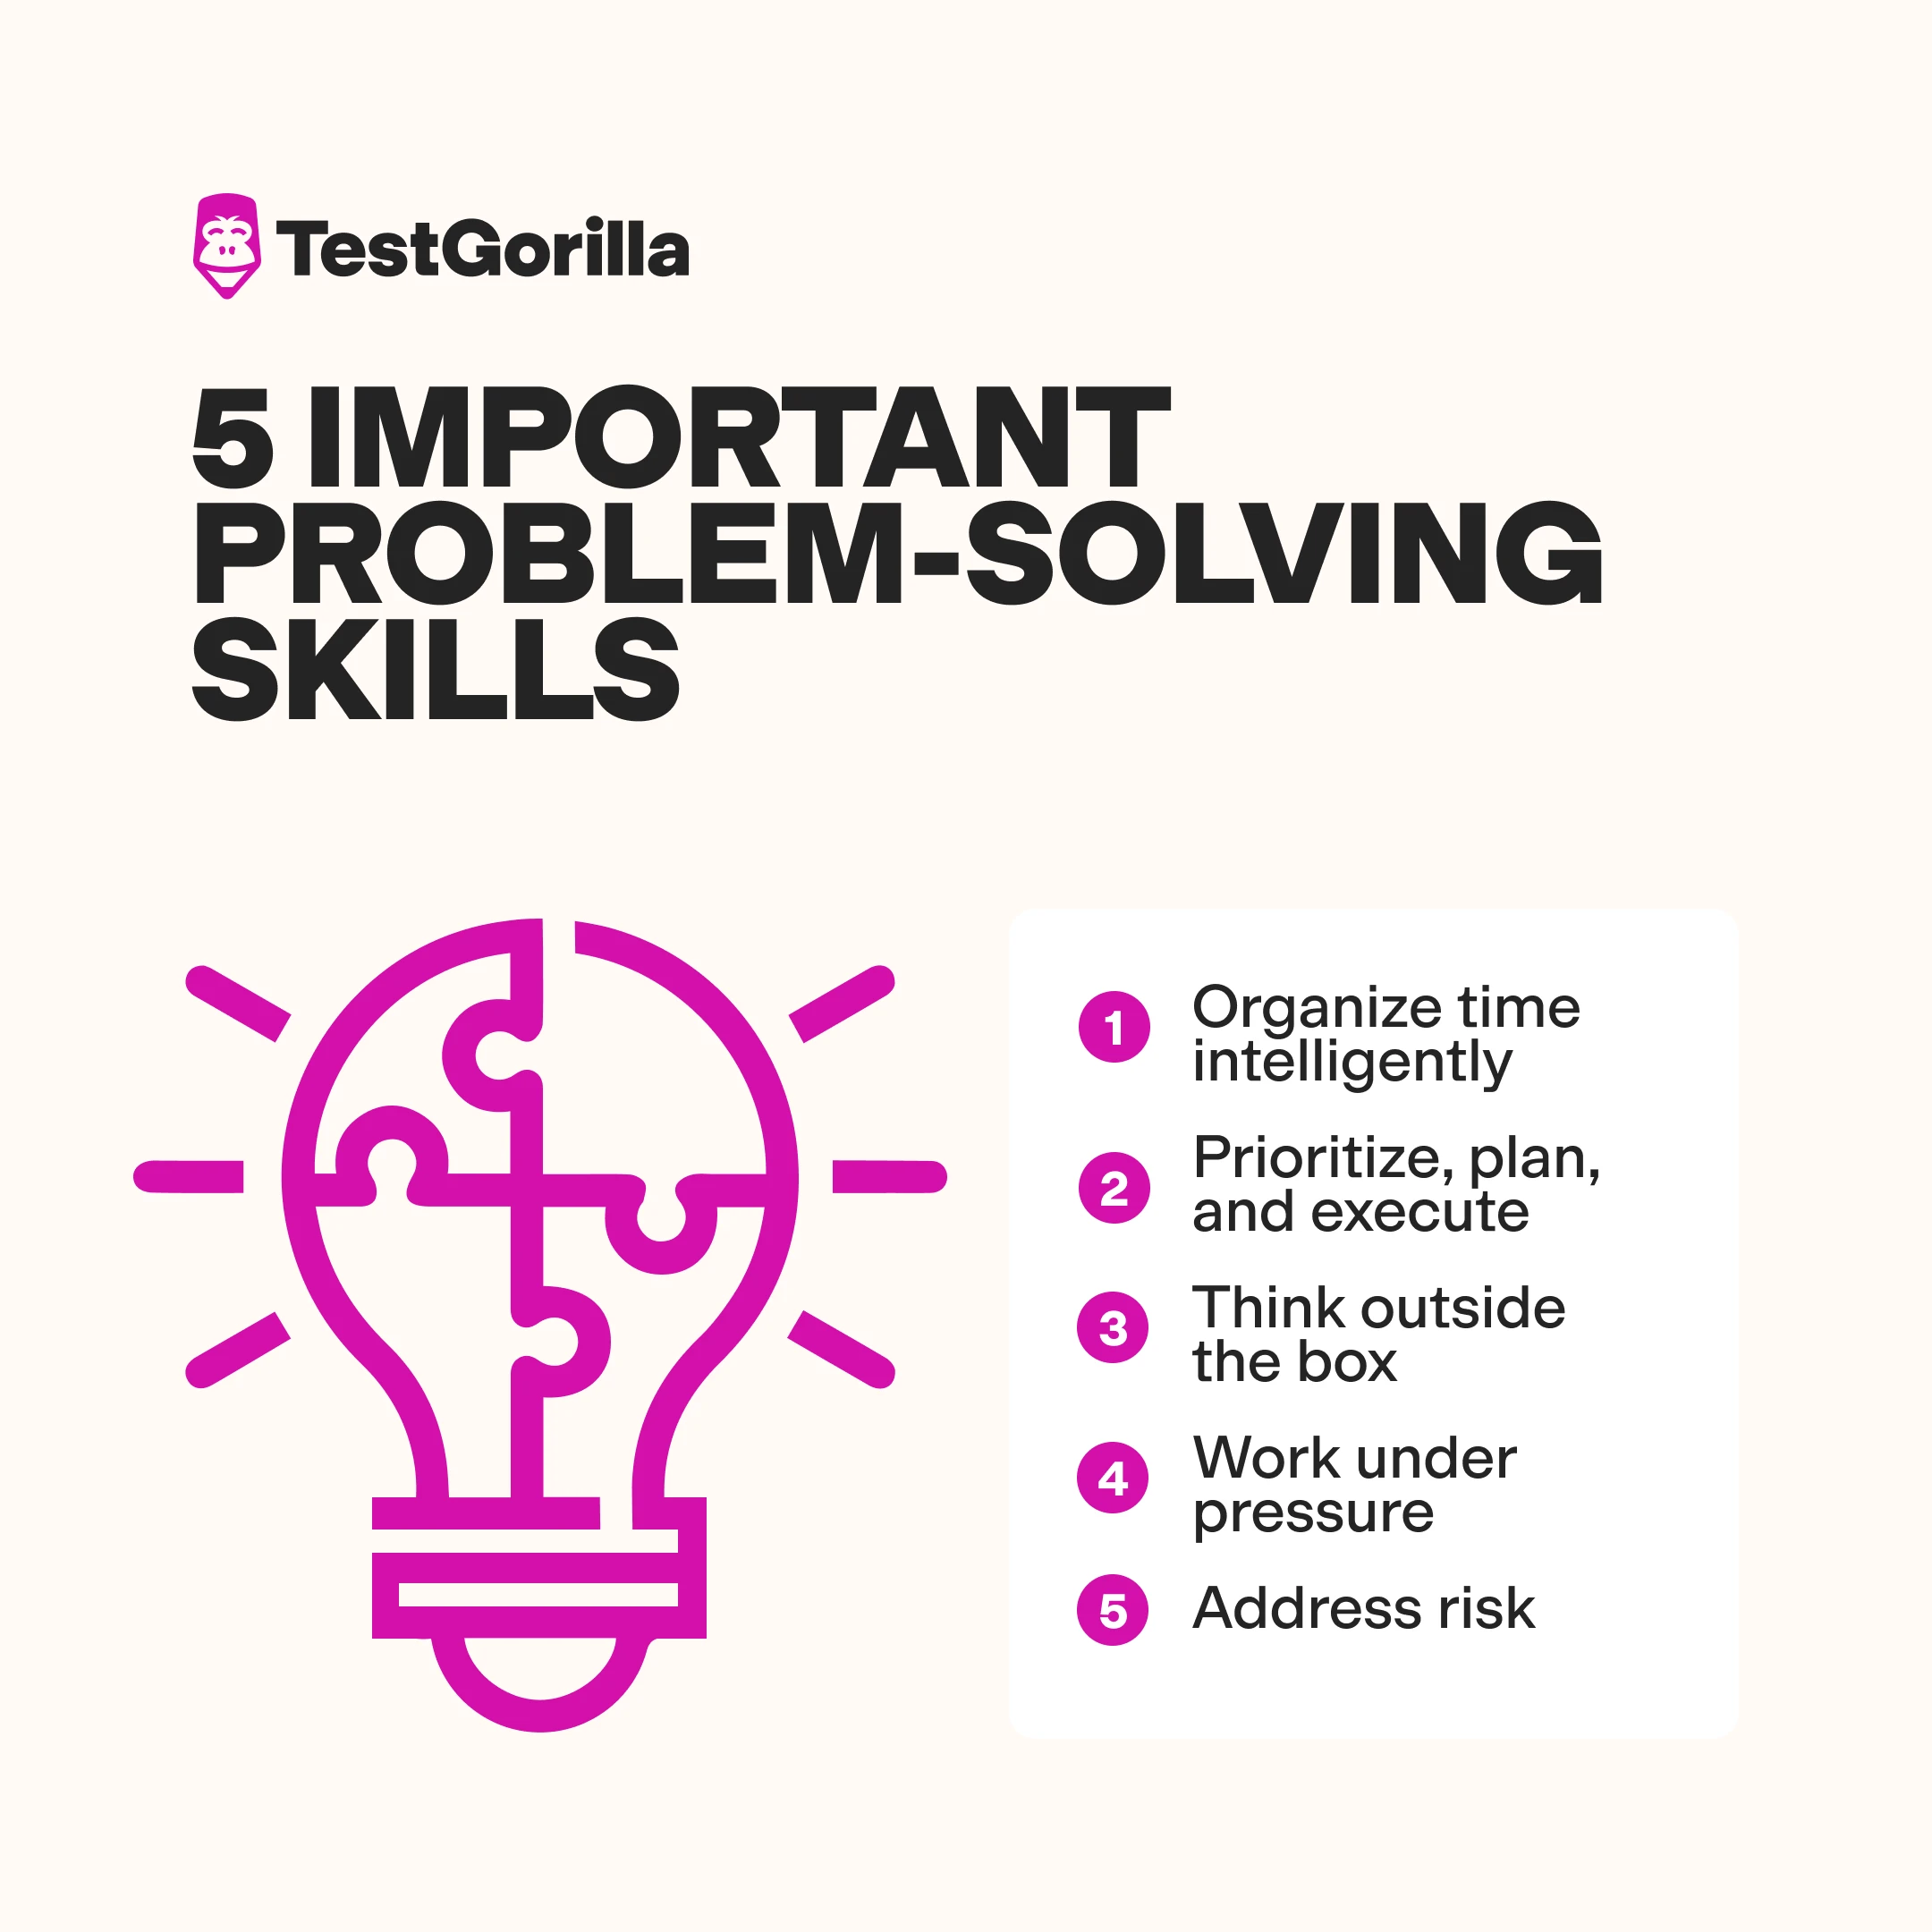 Why are problem solving skills important?